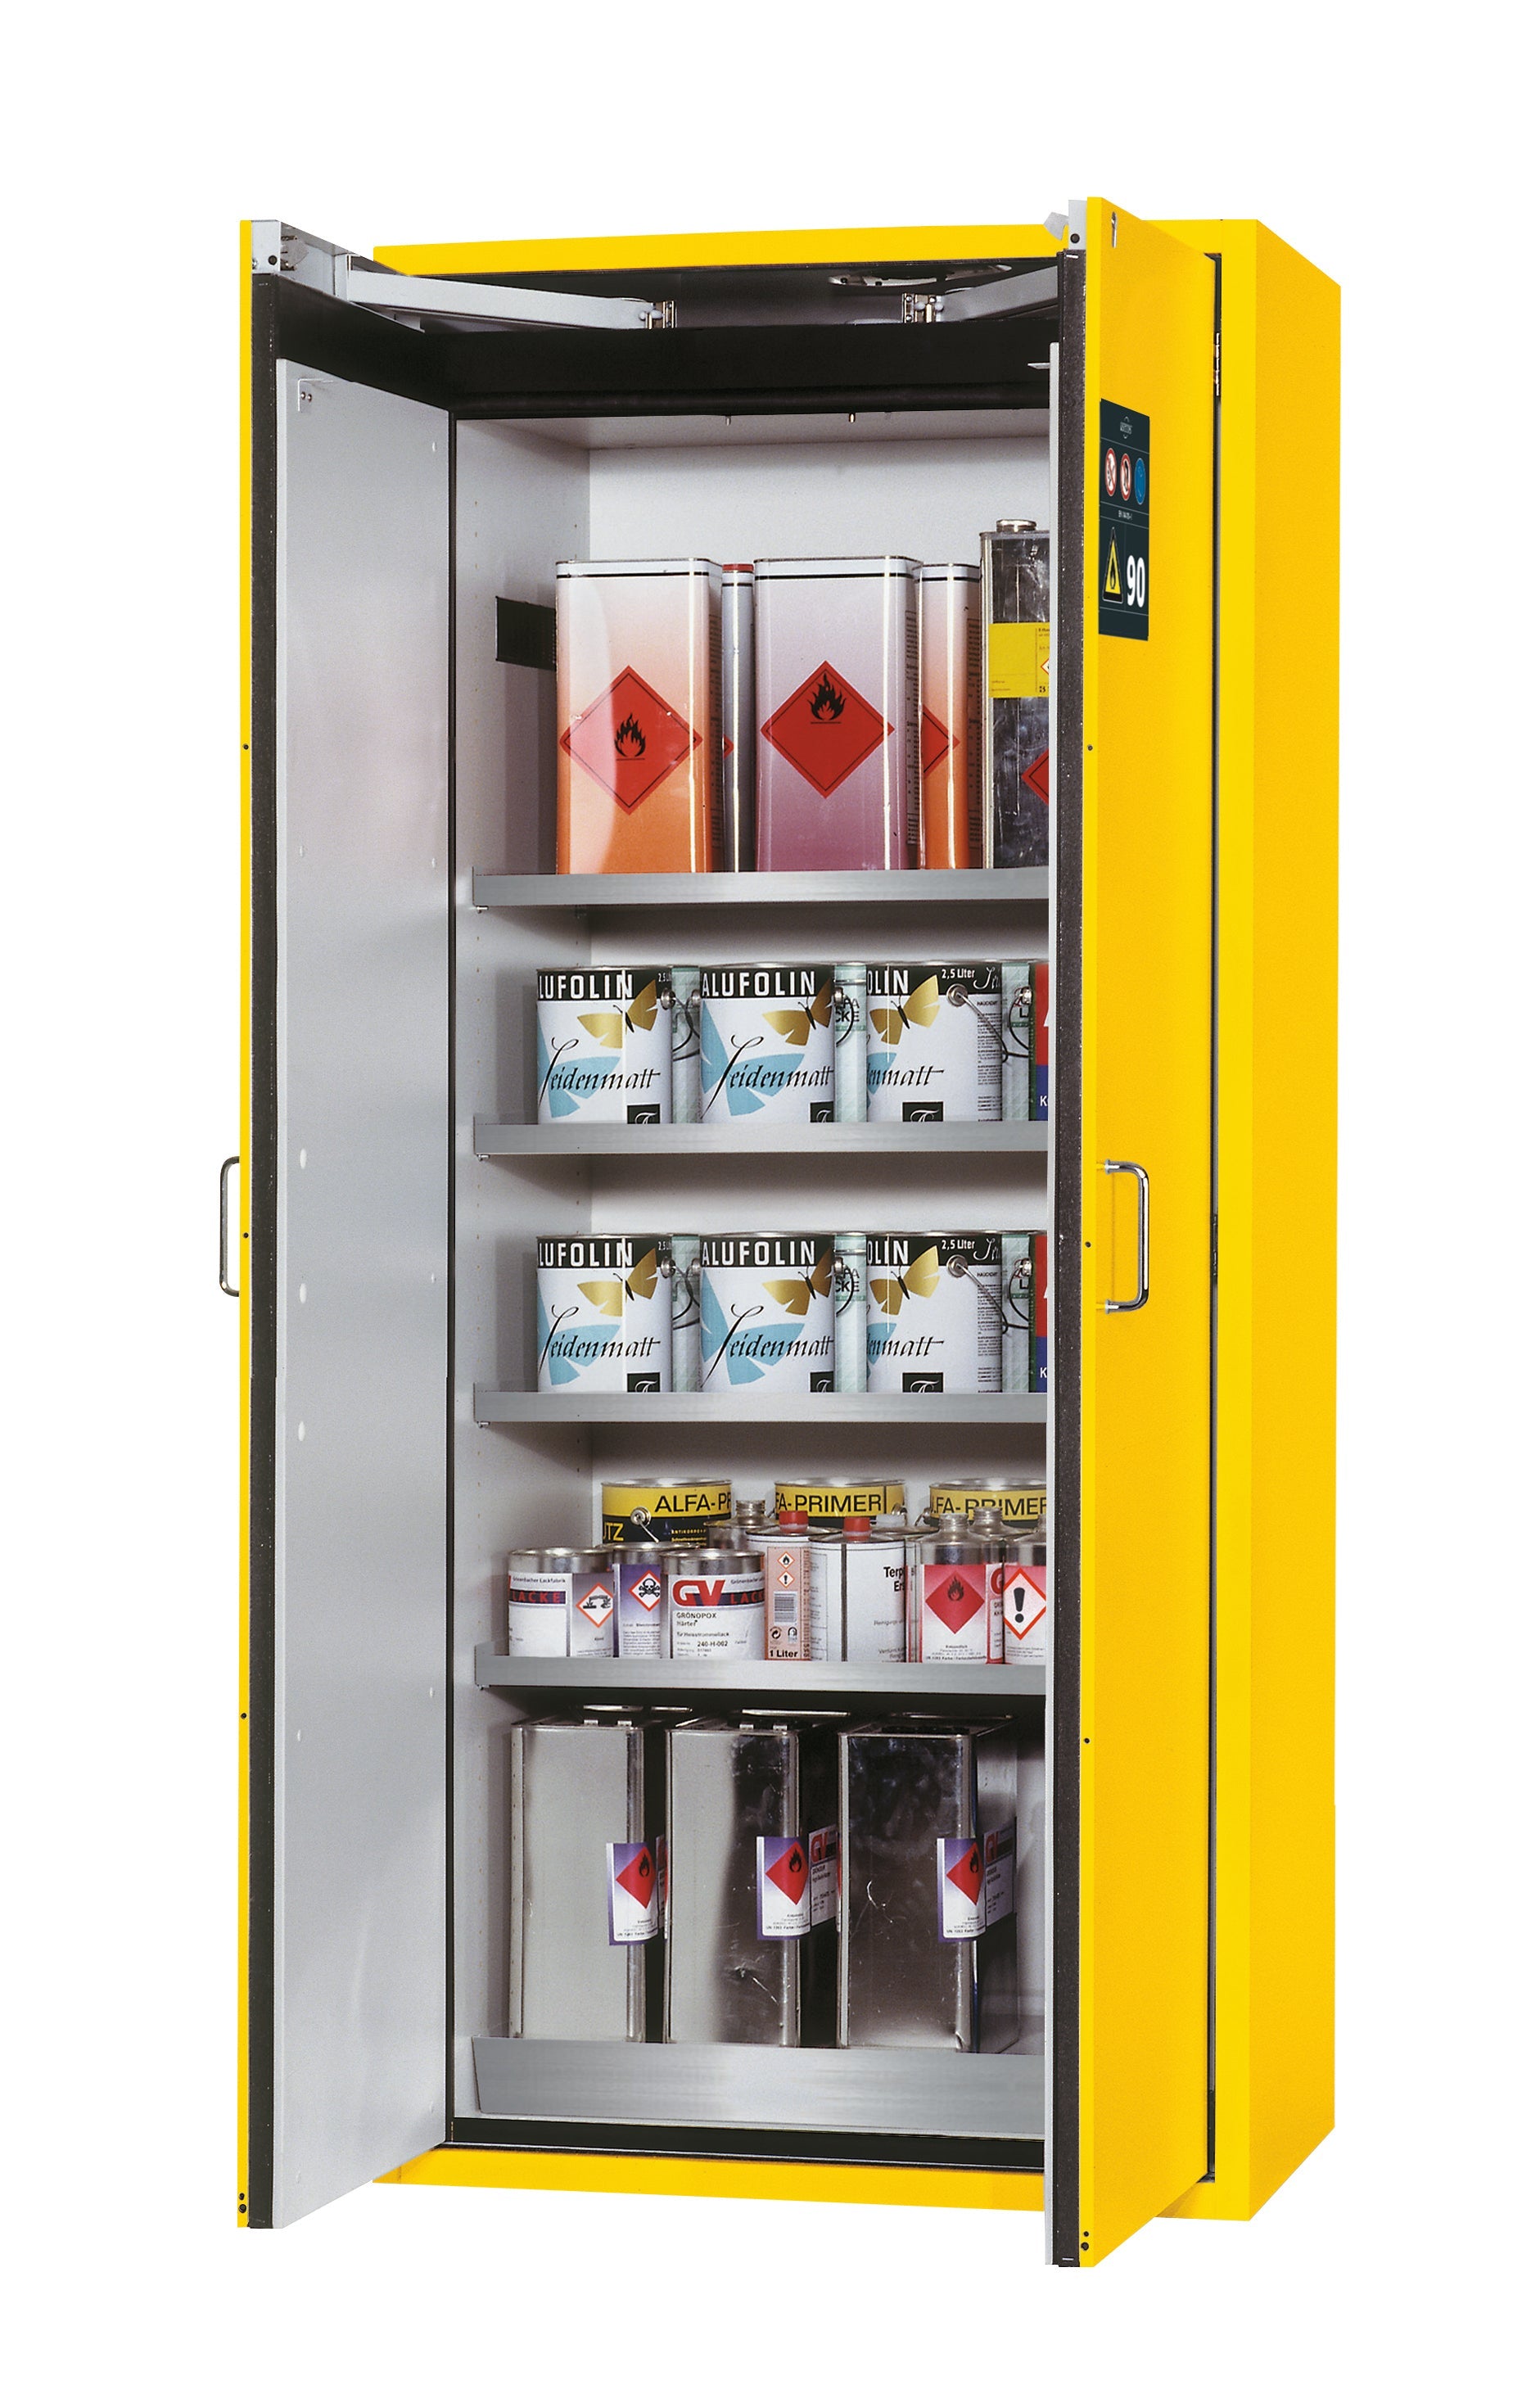 Type 90 safety cabinet S-CLASSIC-90 model S90.196.090 in safety yellow RAL 1004 with 4x standard shelves (stainless steel 1.4301)